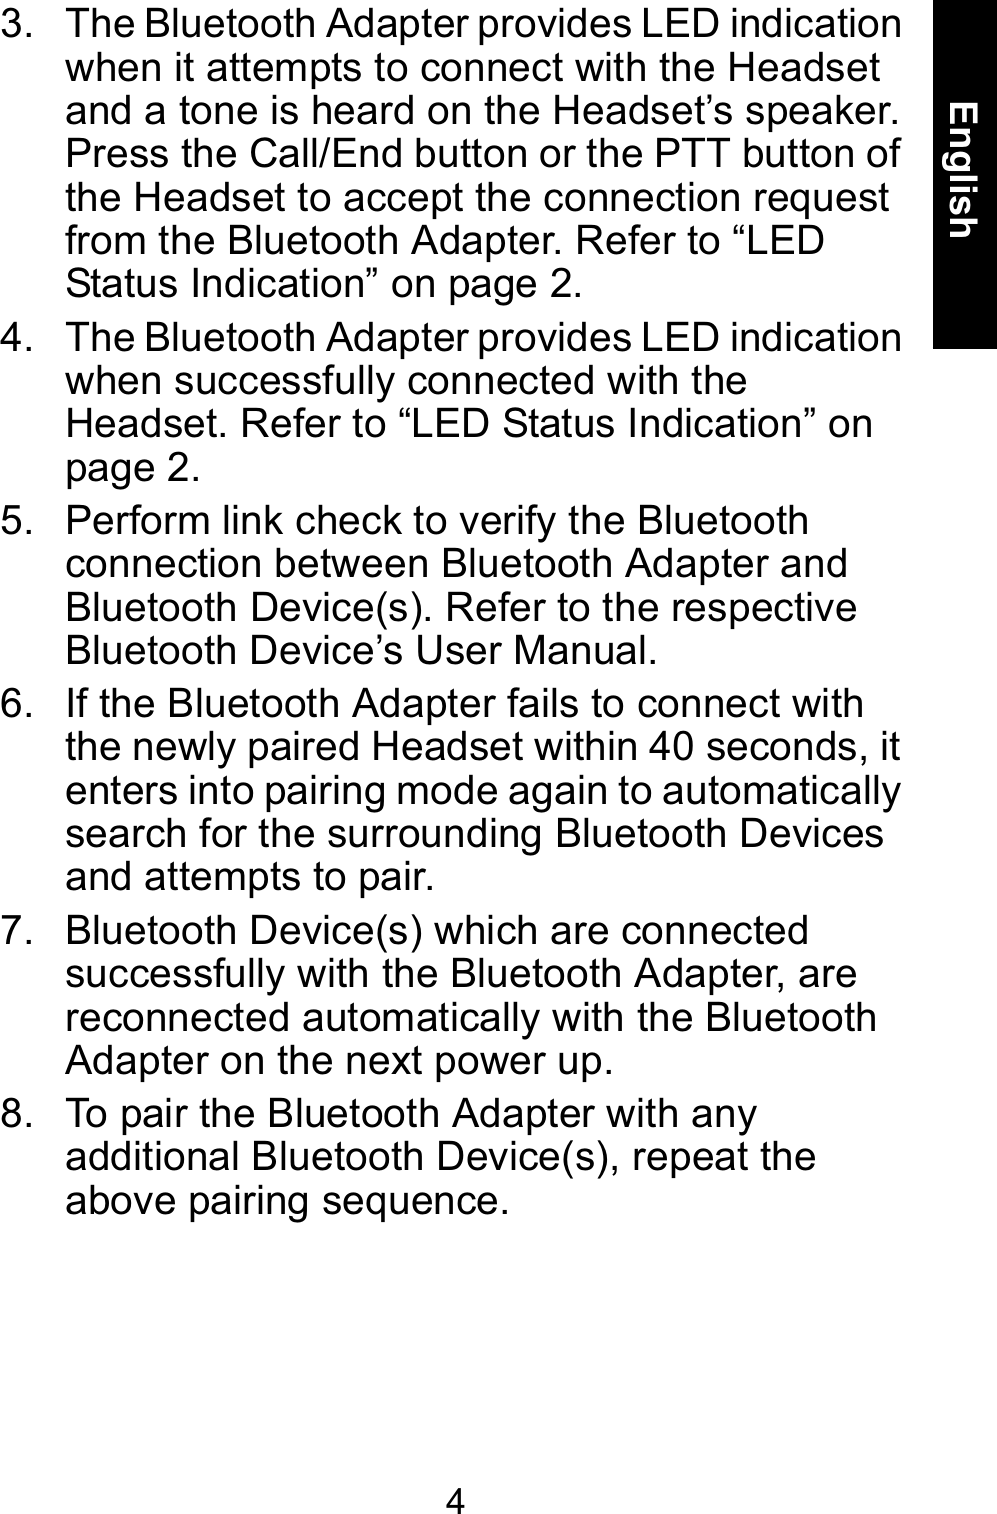 4English3. The Bluetooth Adapter provides LED indication when it attempts to connect with the Headset and a tone is heard on the Headset’s speaker. Press the Call/End button or the PTT button of the Headset to accept the connection request from the Bluetooth Adapter. Refer to “LED Status Indication” on page 2.4. The Bluetooth Adapter provides LED indication when successfully connected with the Headset. Refer to “LED Status Indication” on page 2. 5. Perform link check to verify the Bluetooth connection between Bluetooth Adapter and Bluetooth Device(s). Refer to the respective Bluetooth Device’s User Manual.6. If the Bluetooth Adapter fails to connect with the newly paired Headset within 40 seconds, it enters into pairing mode again to automatically search for the surrounding Bluetooth Devices and attempts to pair.7. Bluetooth Device(s) which are connected successfully with the Bluetooth Adapter, are reconnected automatically with the Bluetooth Adapter on the next power up.8. To pair the Bluetooth Adapter with any additional Bluetooth Device(s), repeat the above pairing sequence.